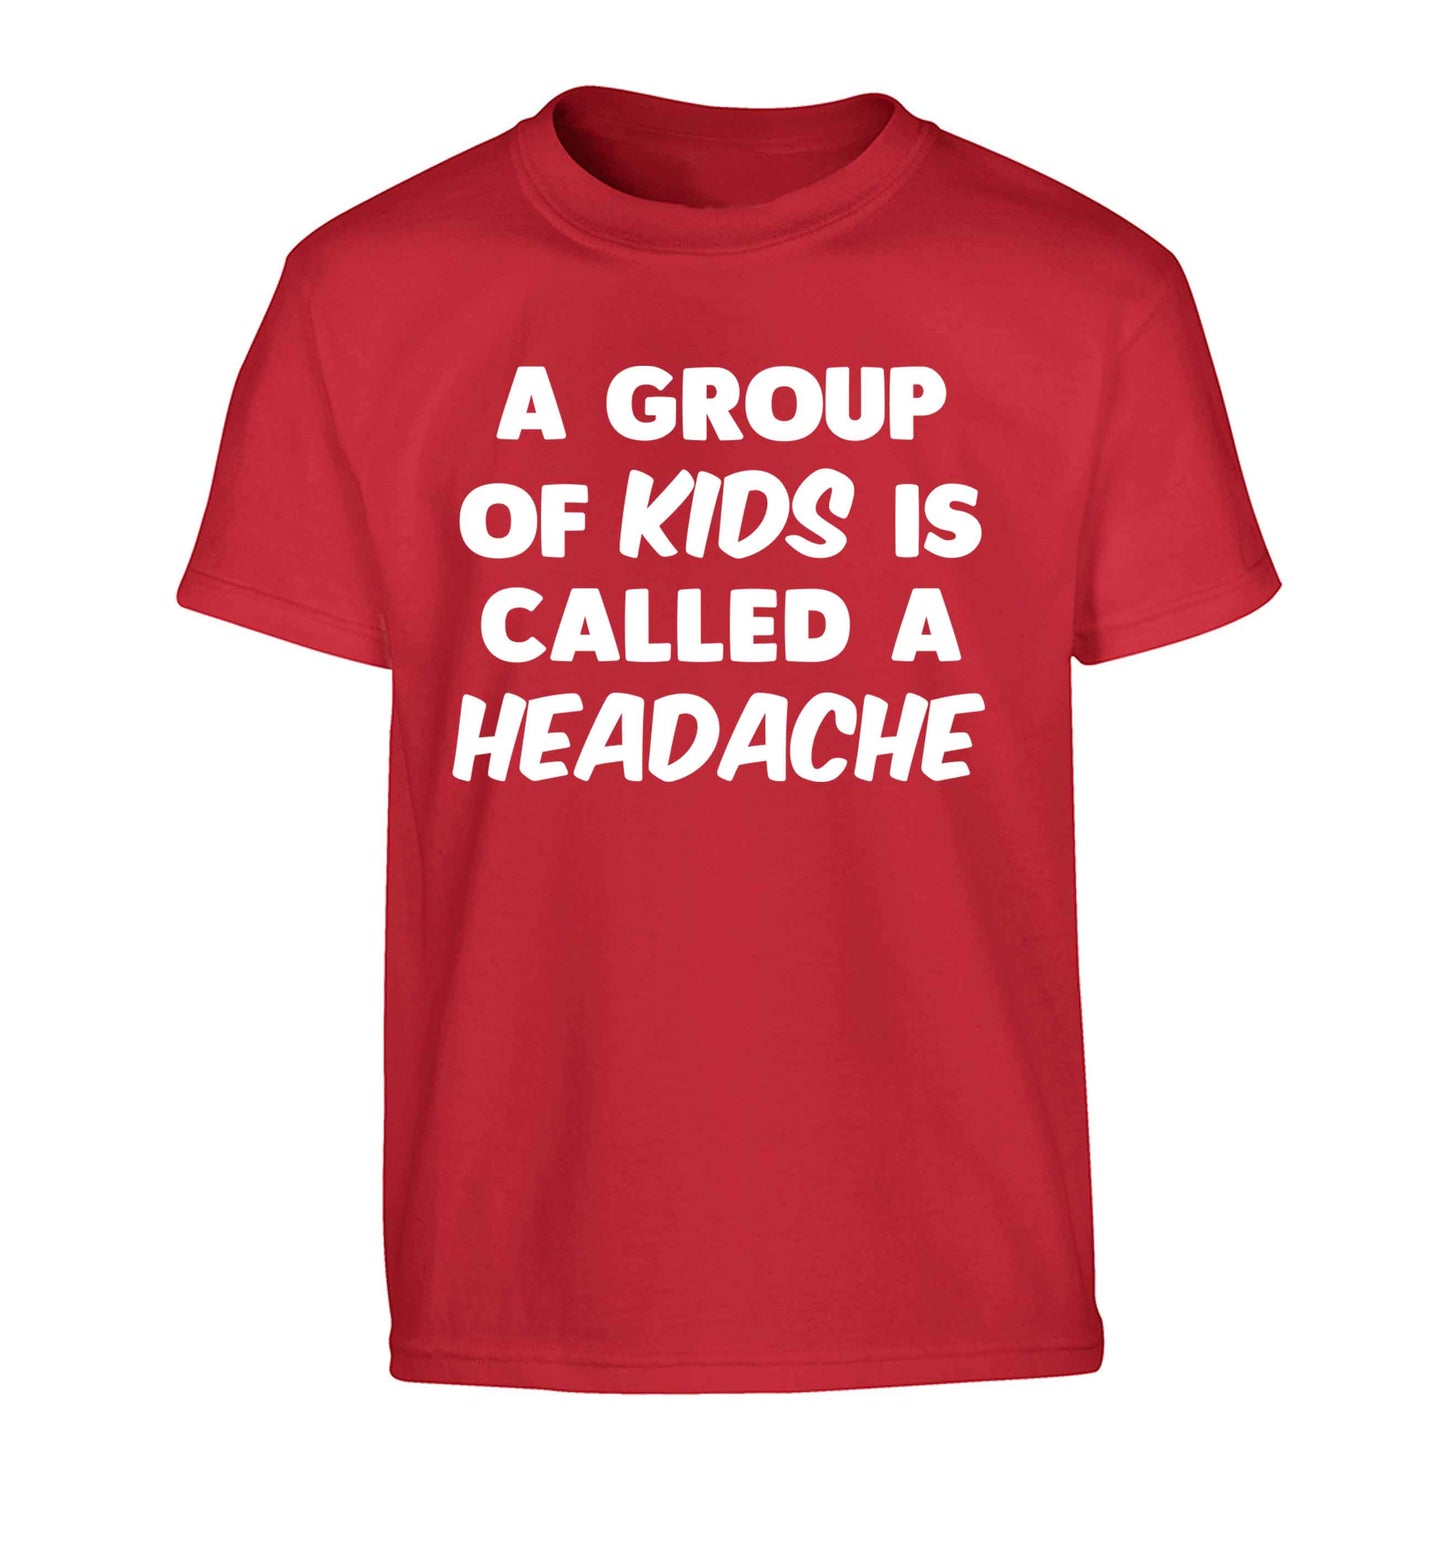 A group of kids is called a headache Children's red Tshirt 12-13 Years